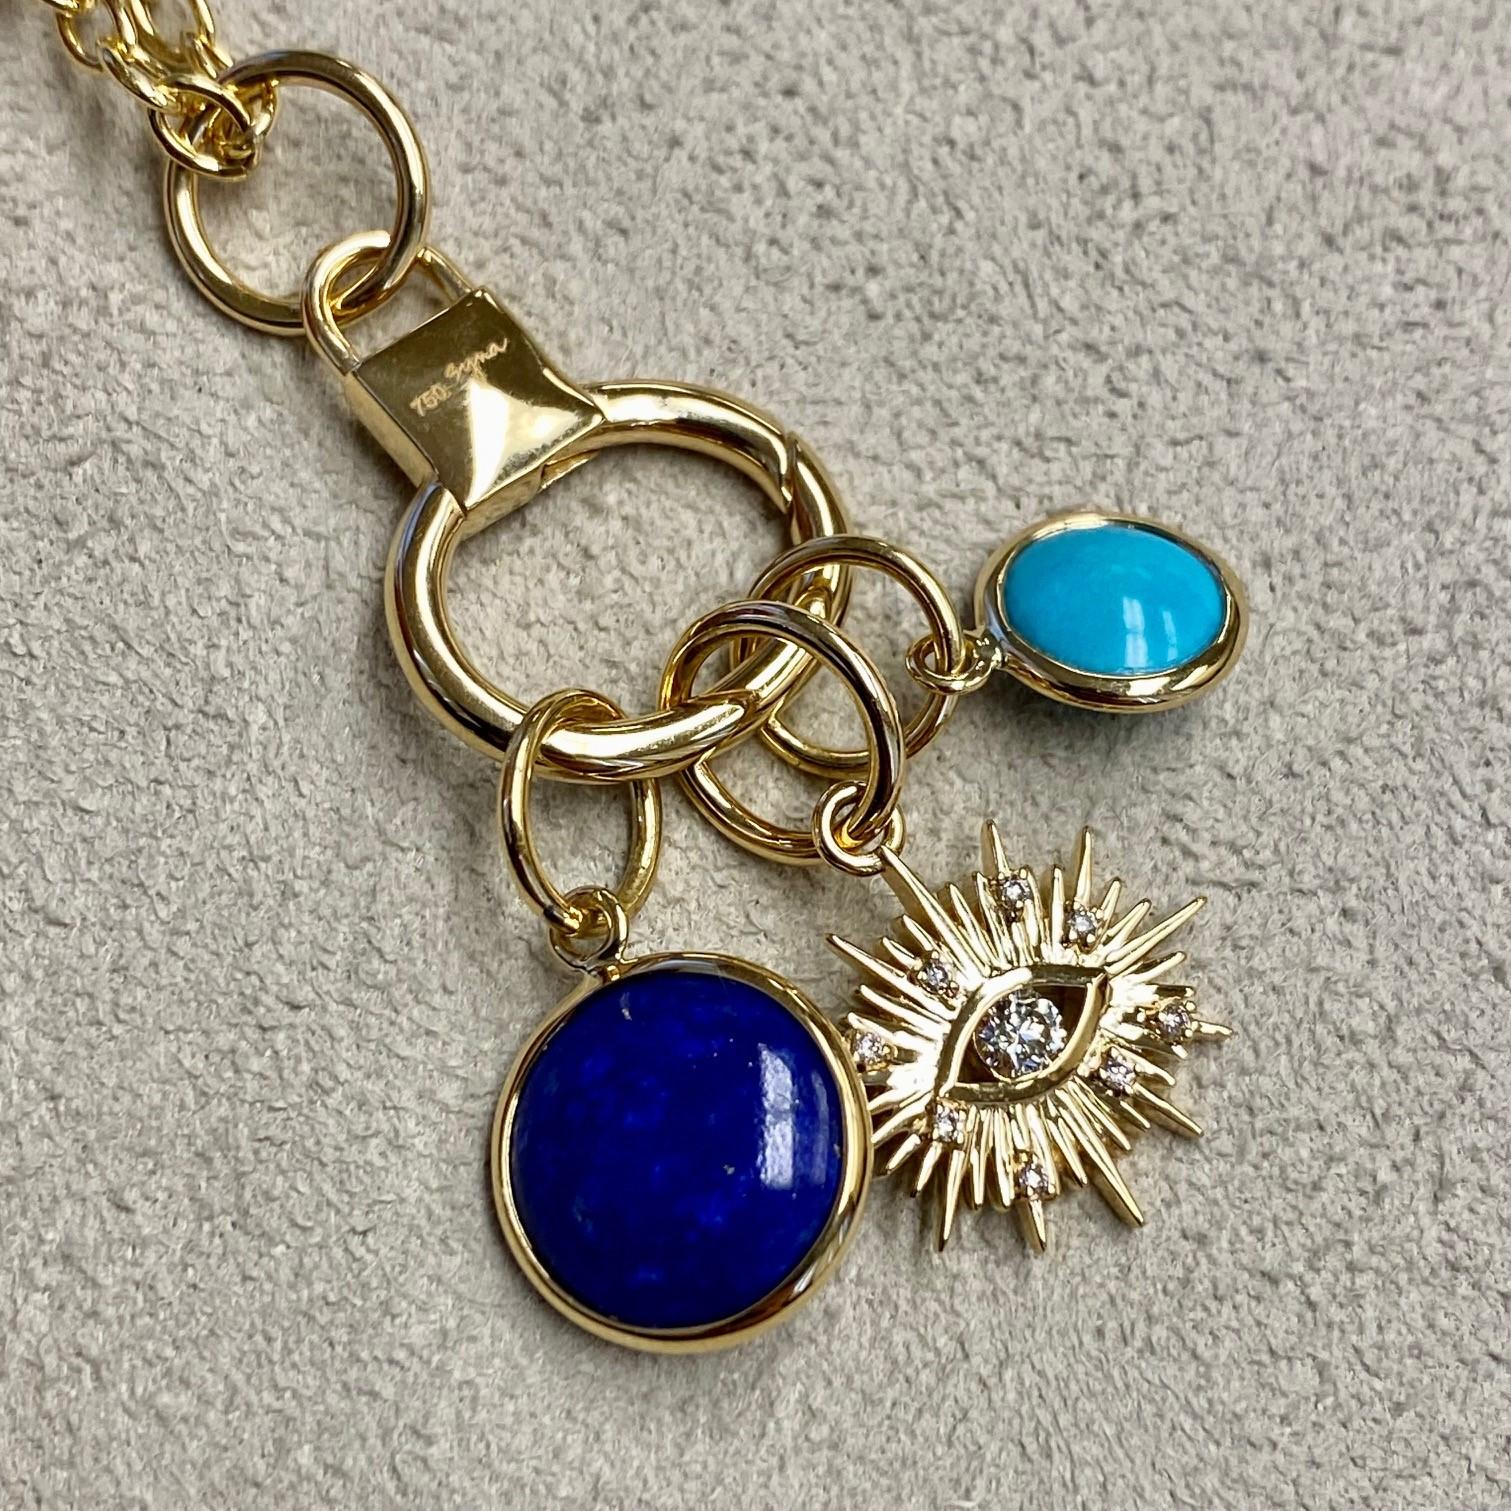 Created in 18 karat yellow gold
Lapis lazuli 3.50 carats approx.
Turquoise 1 carat approx.
Diamonds 0.10 carat approx.
Limited edition
Chain sold separately

Finely crafted from 18 karat yellow gold, this limited edition charms is adorned with Lapis